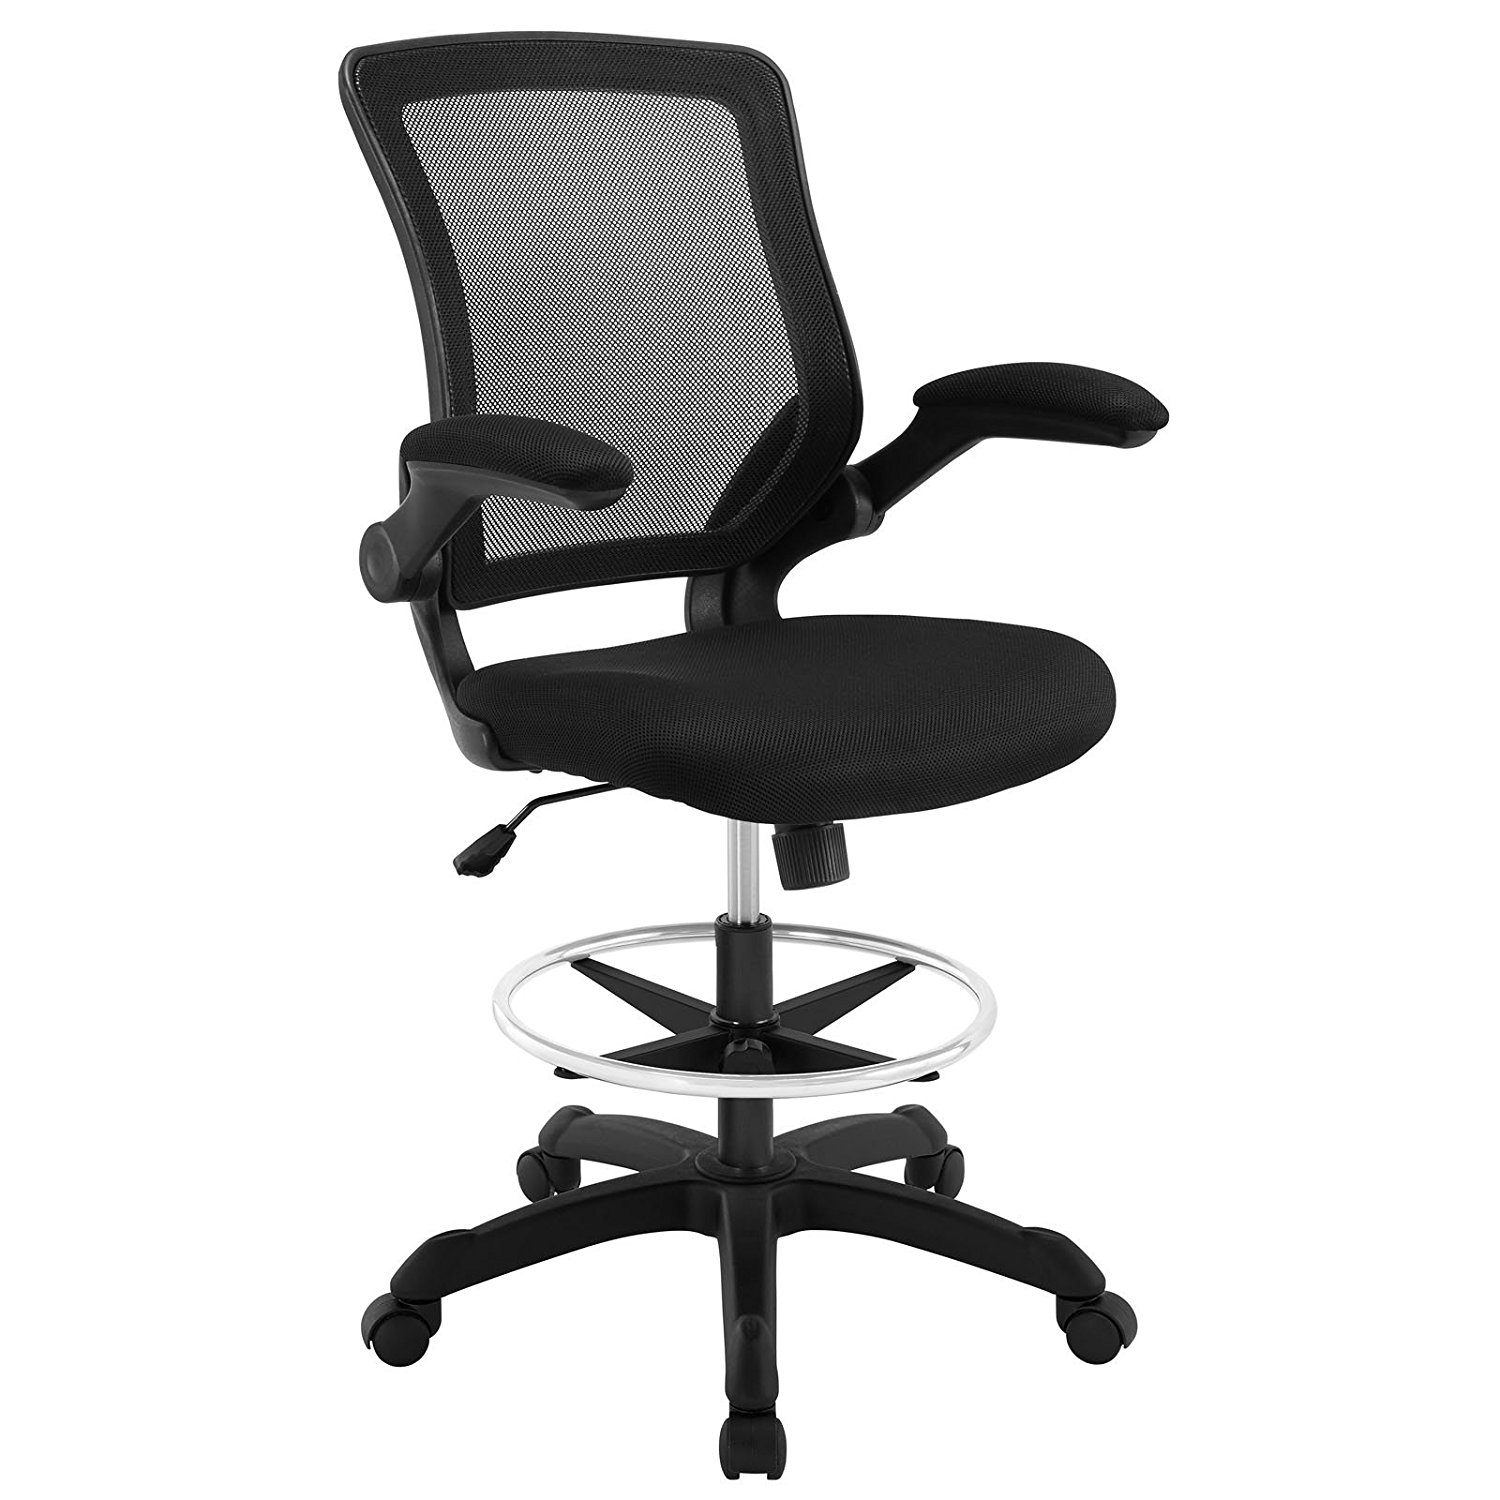 Executive Office Chair with PU Leather Back Support